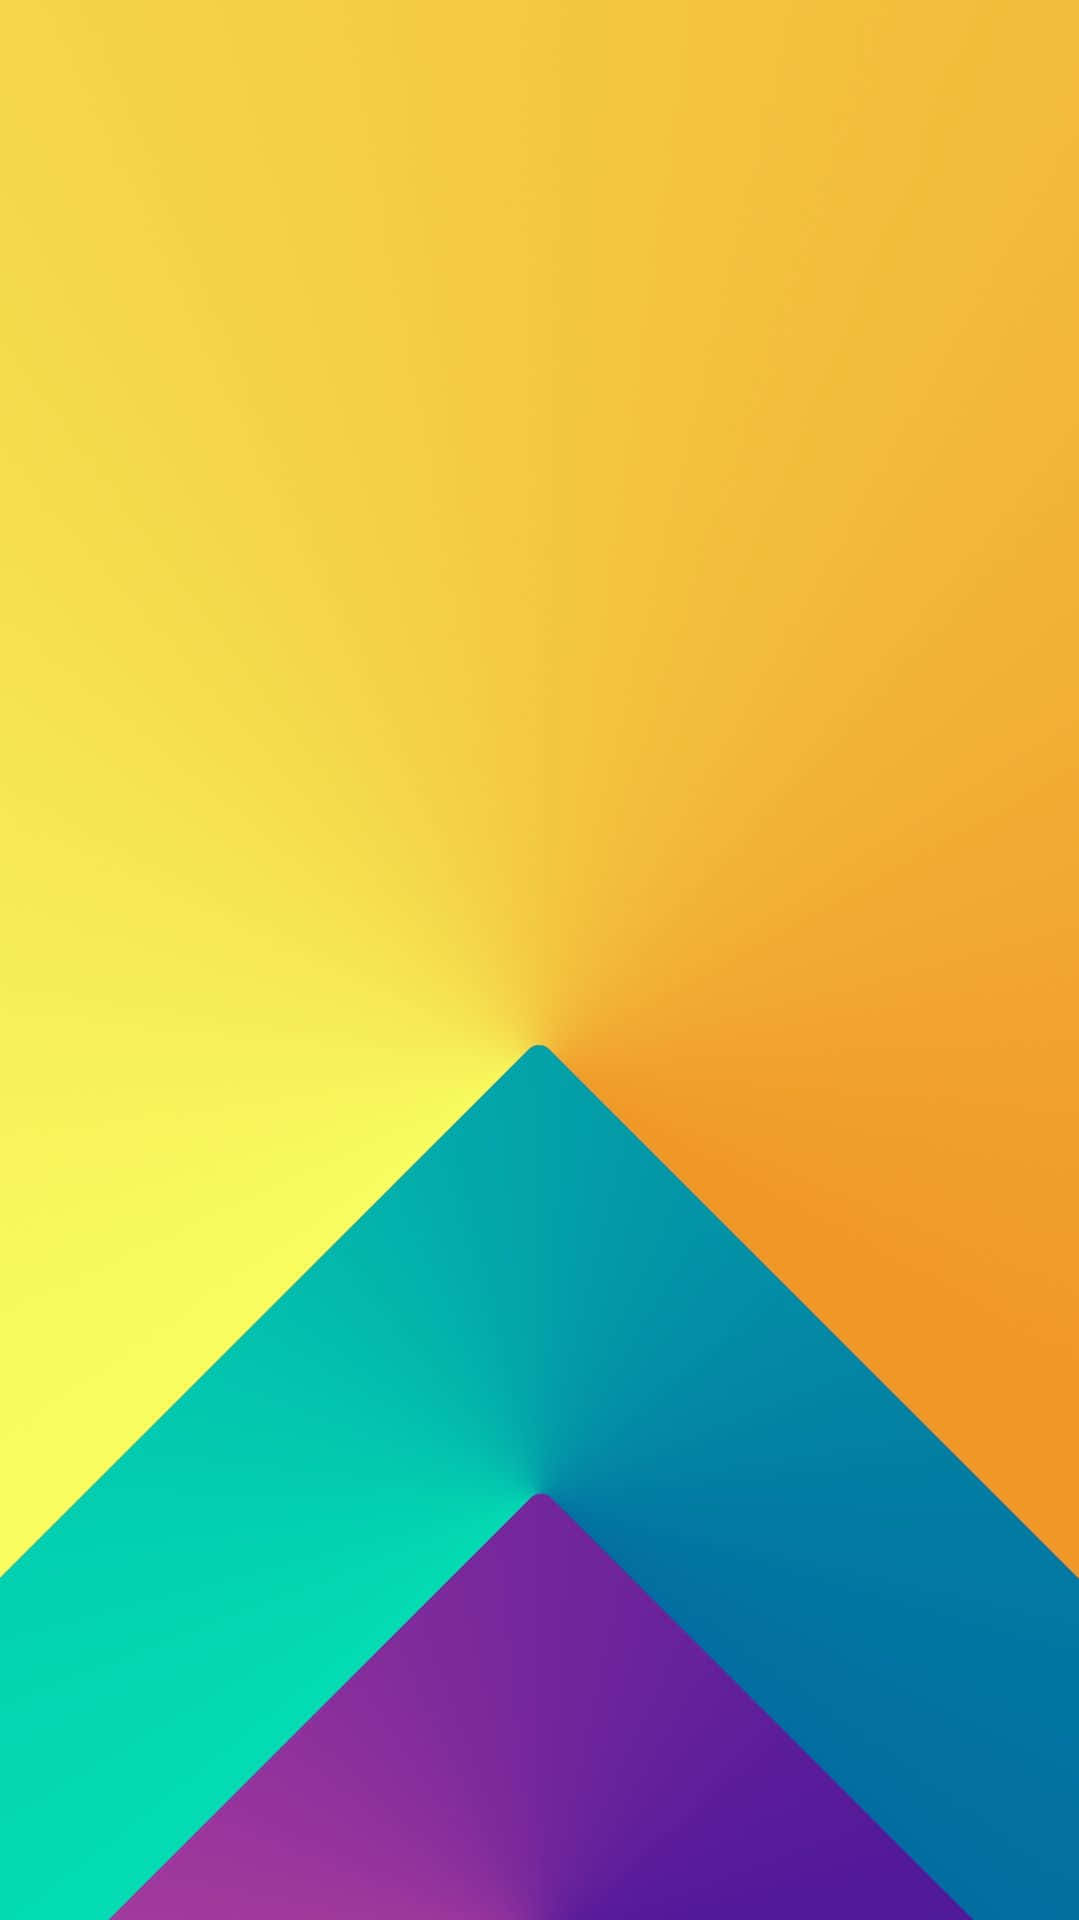 100+] Colorful Iphone Wallpapers for FREE 